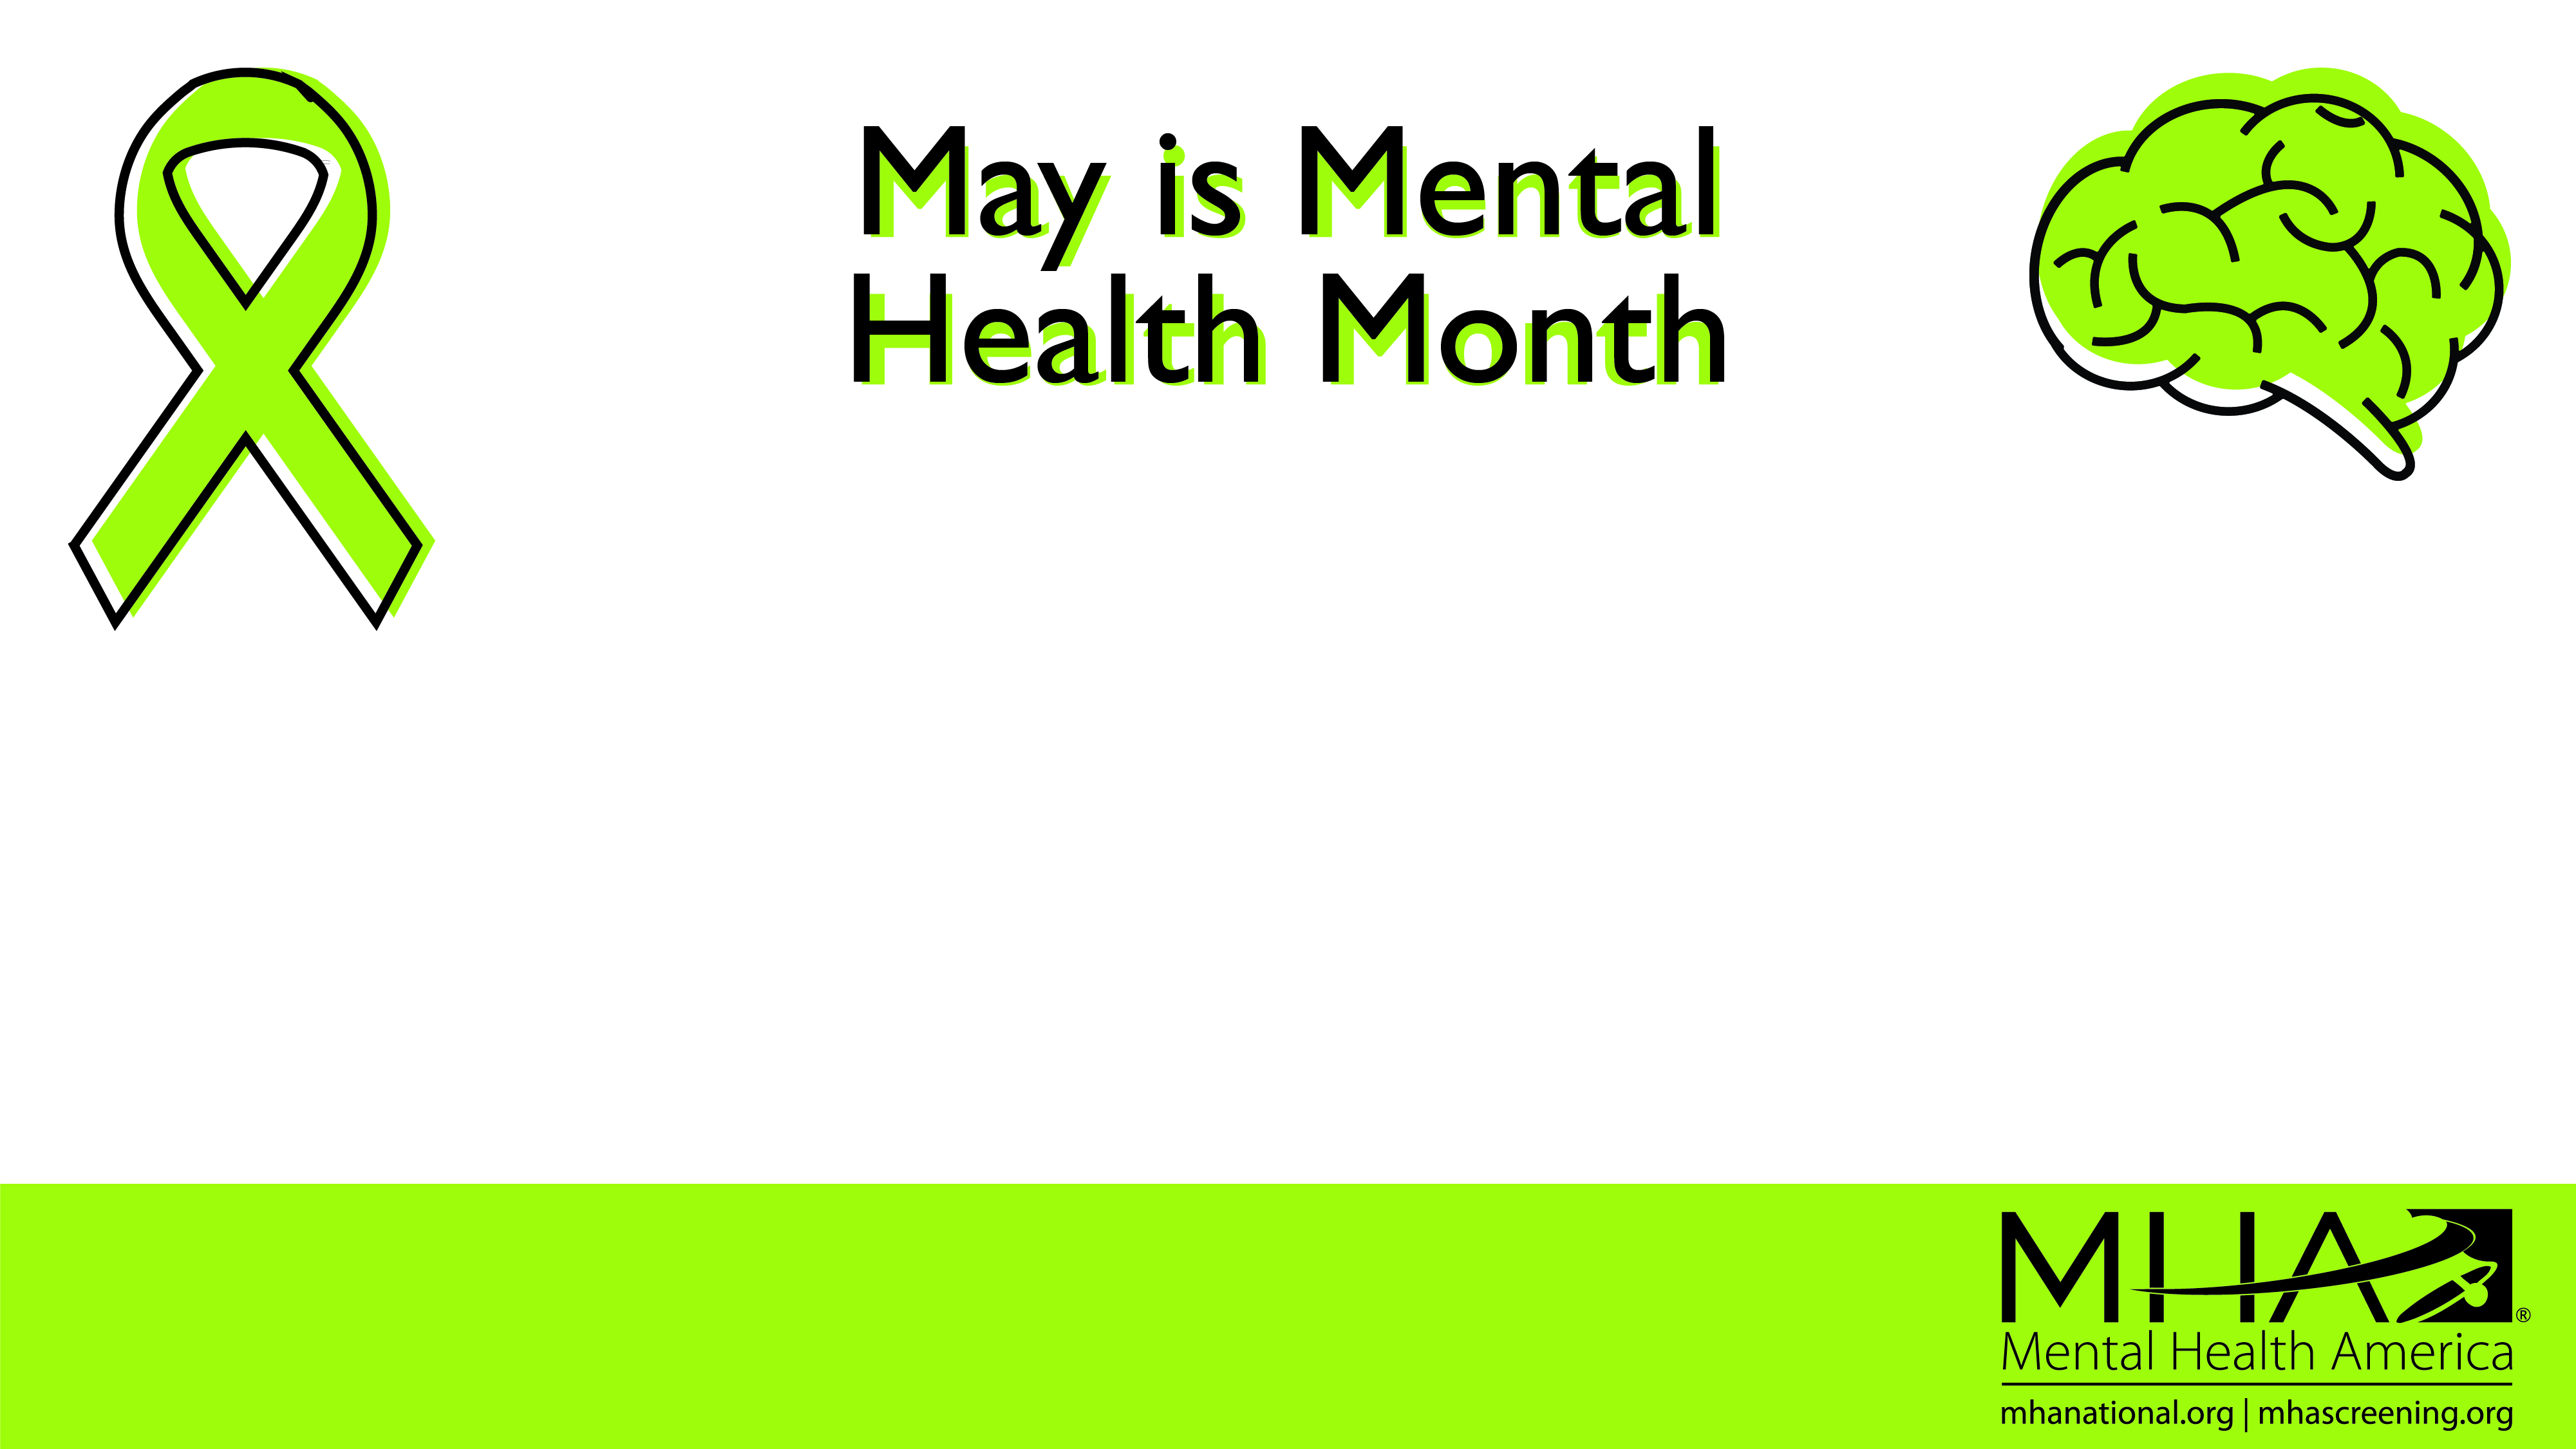 May is Mental Health Month with green ribbon and brain